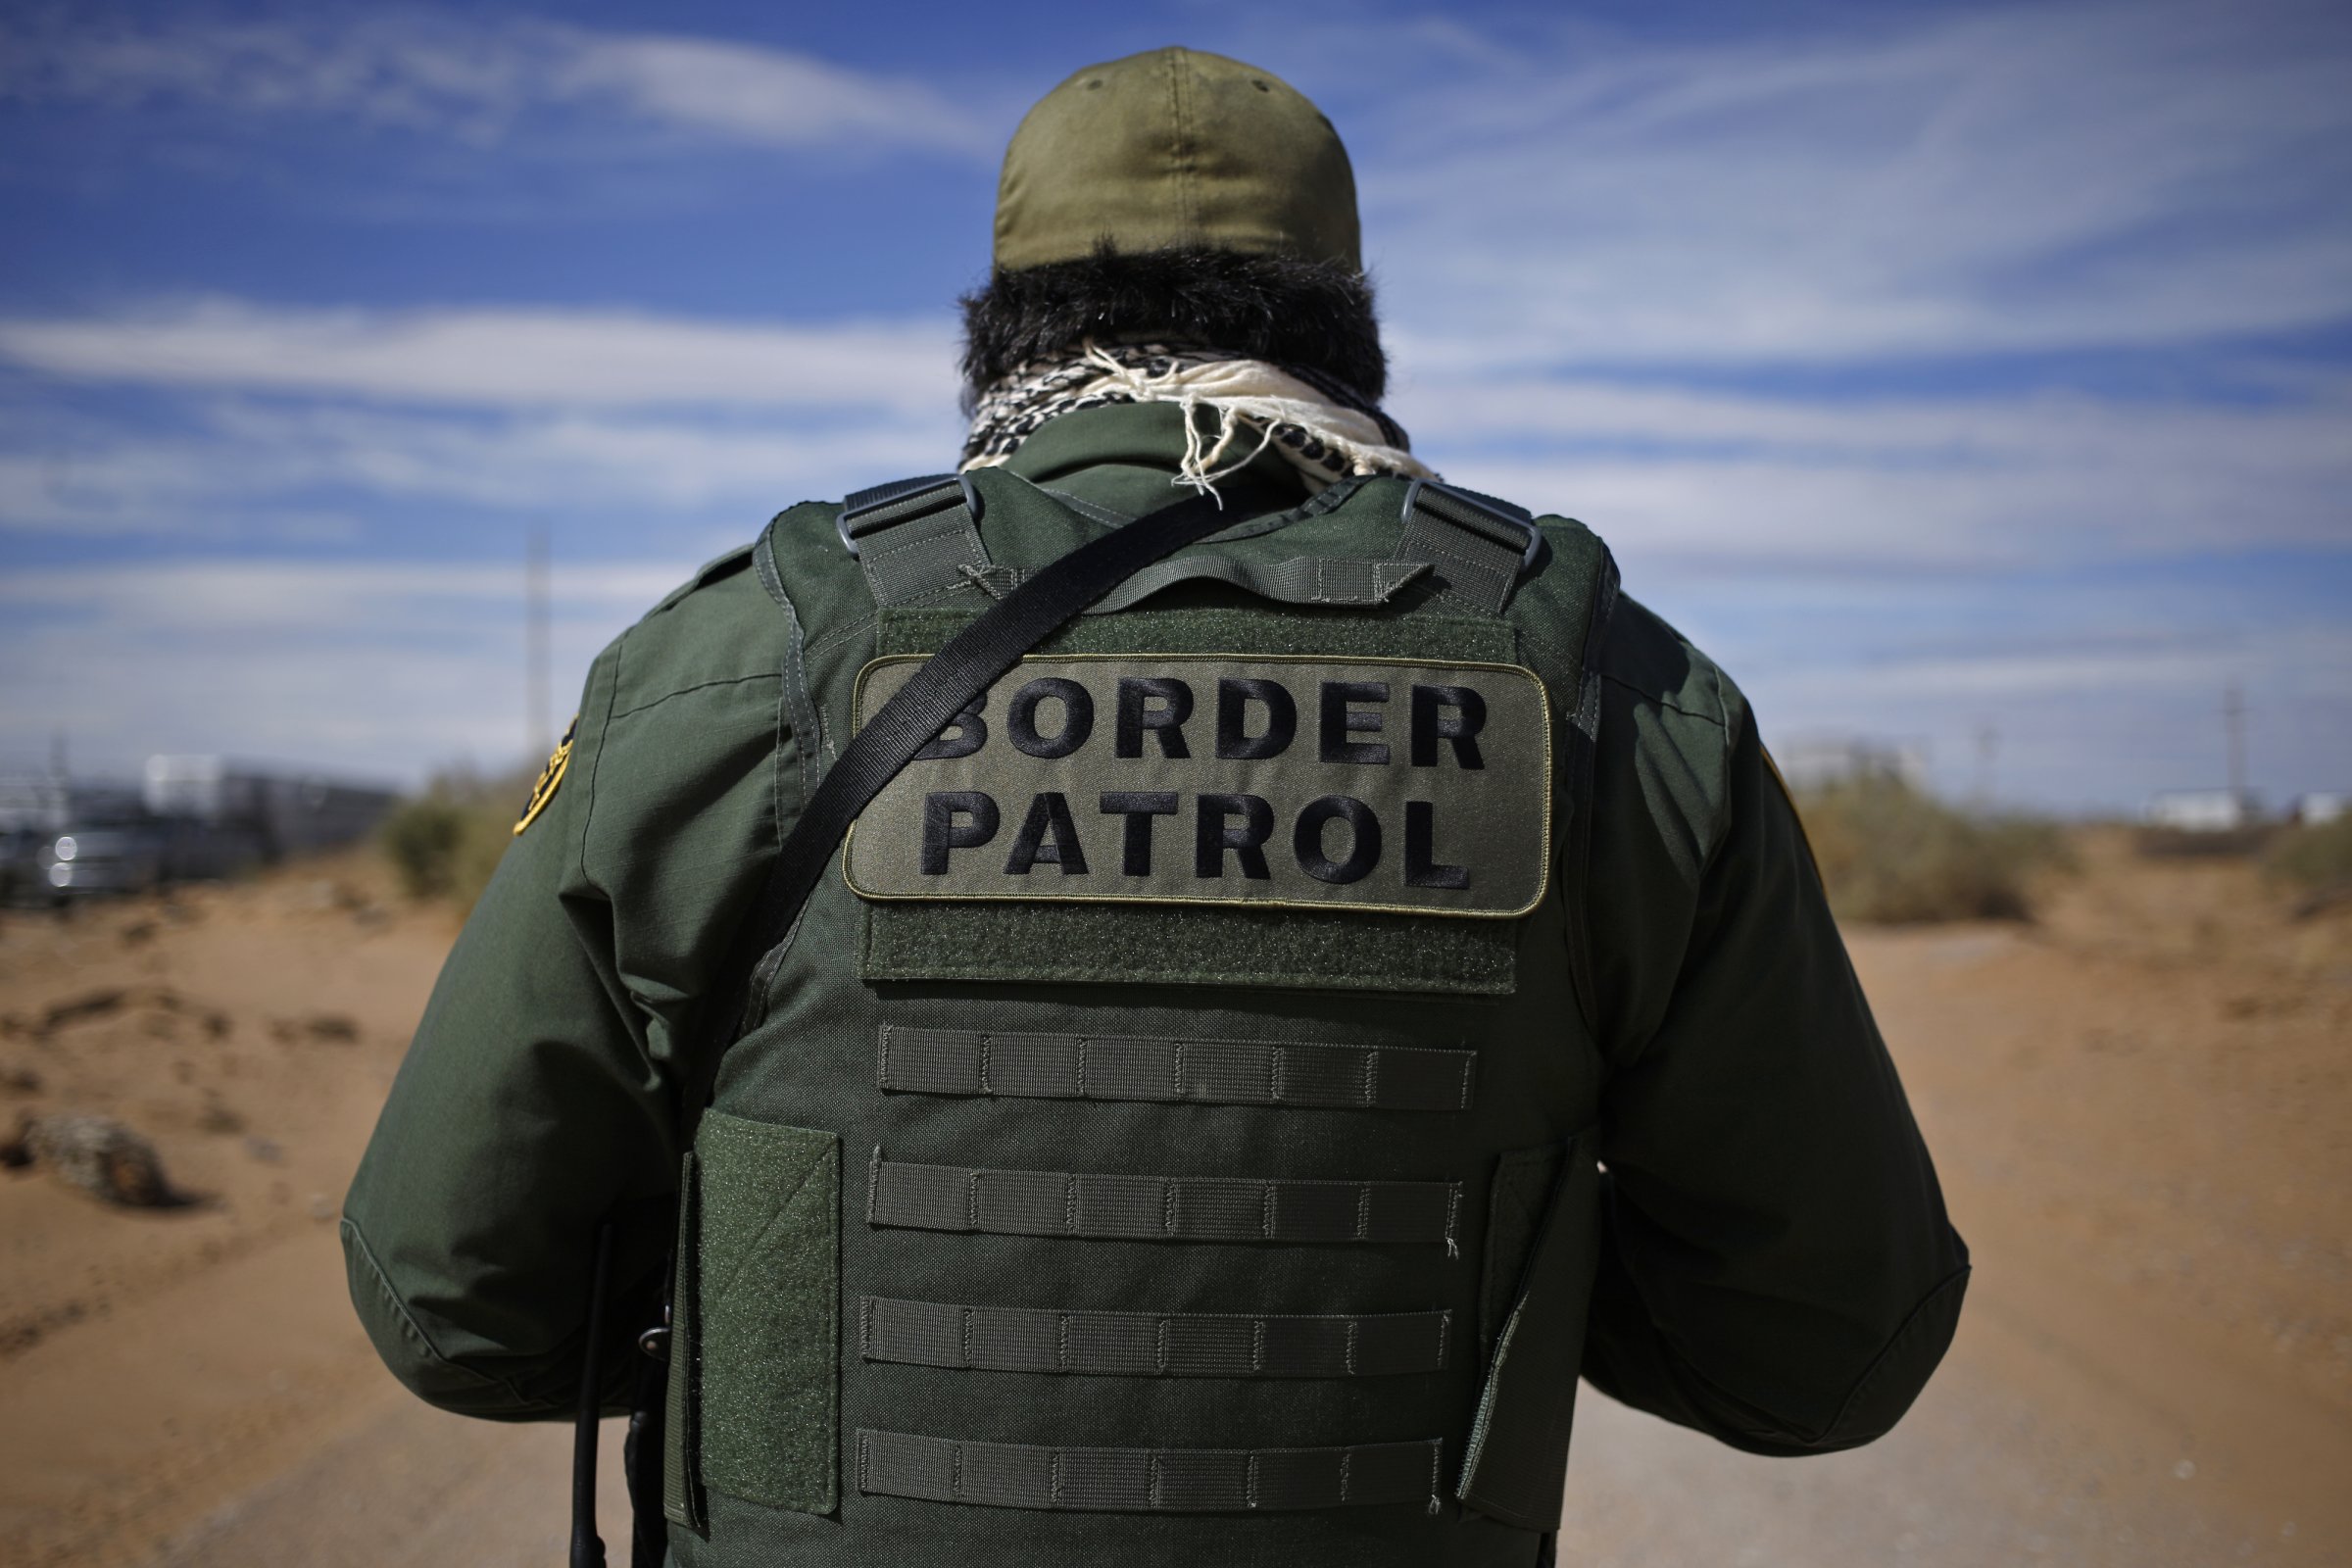 A U.S. Border Patrol agent stands for a photograph while keeping watch along the U.S. and Mexico border in Santa Teresa, New Mexico, U.S., on Friday, Feb. 17, 2017.